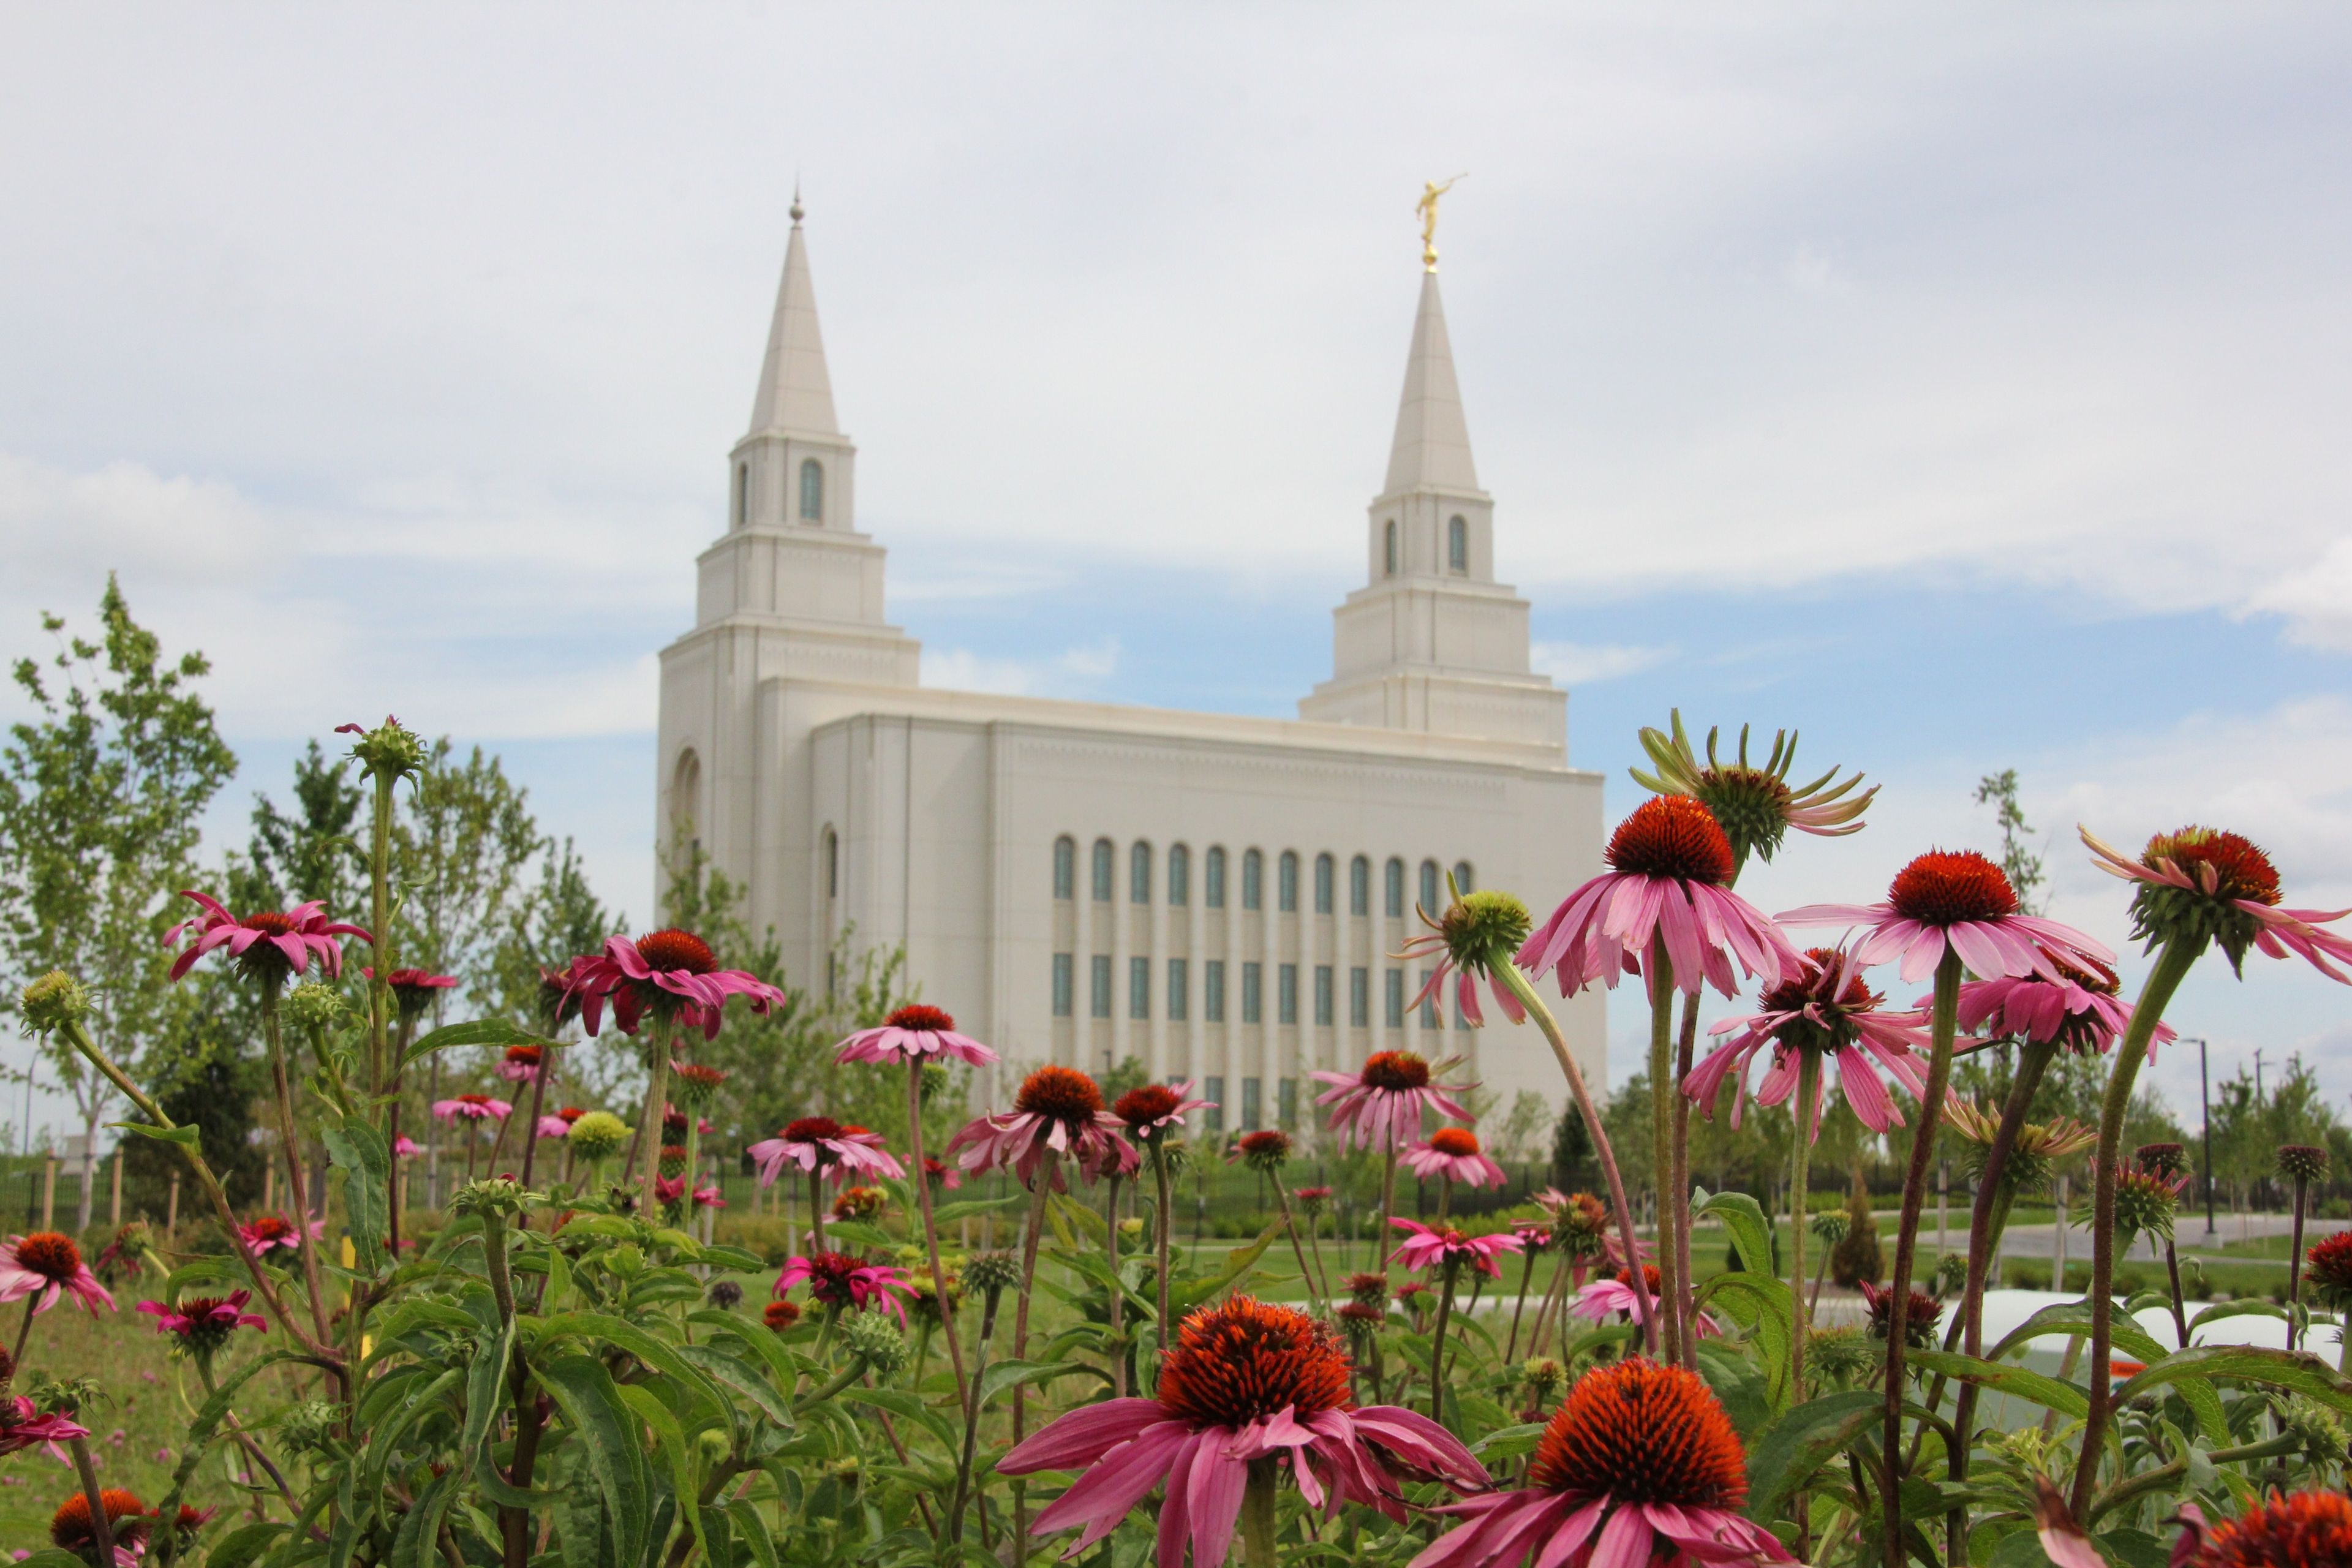 Flowers on the grounds of the temple frame an exterior view of the Kansas City Missouri Temple.